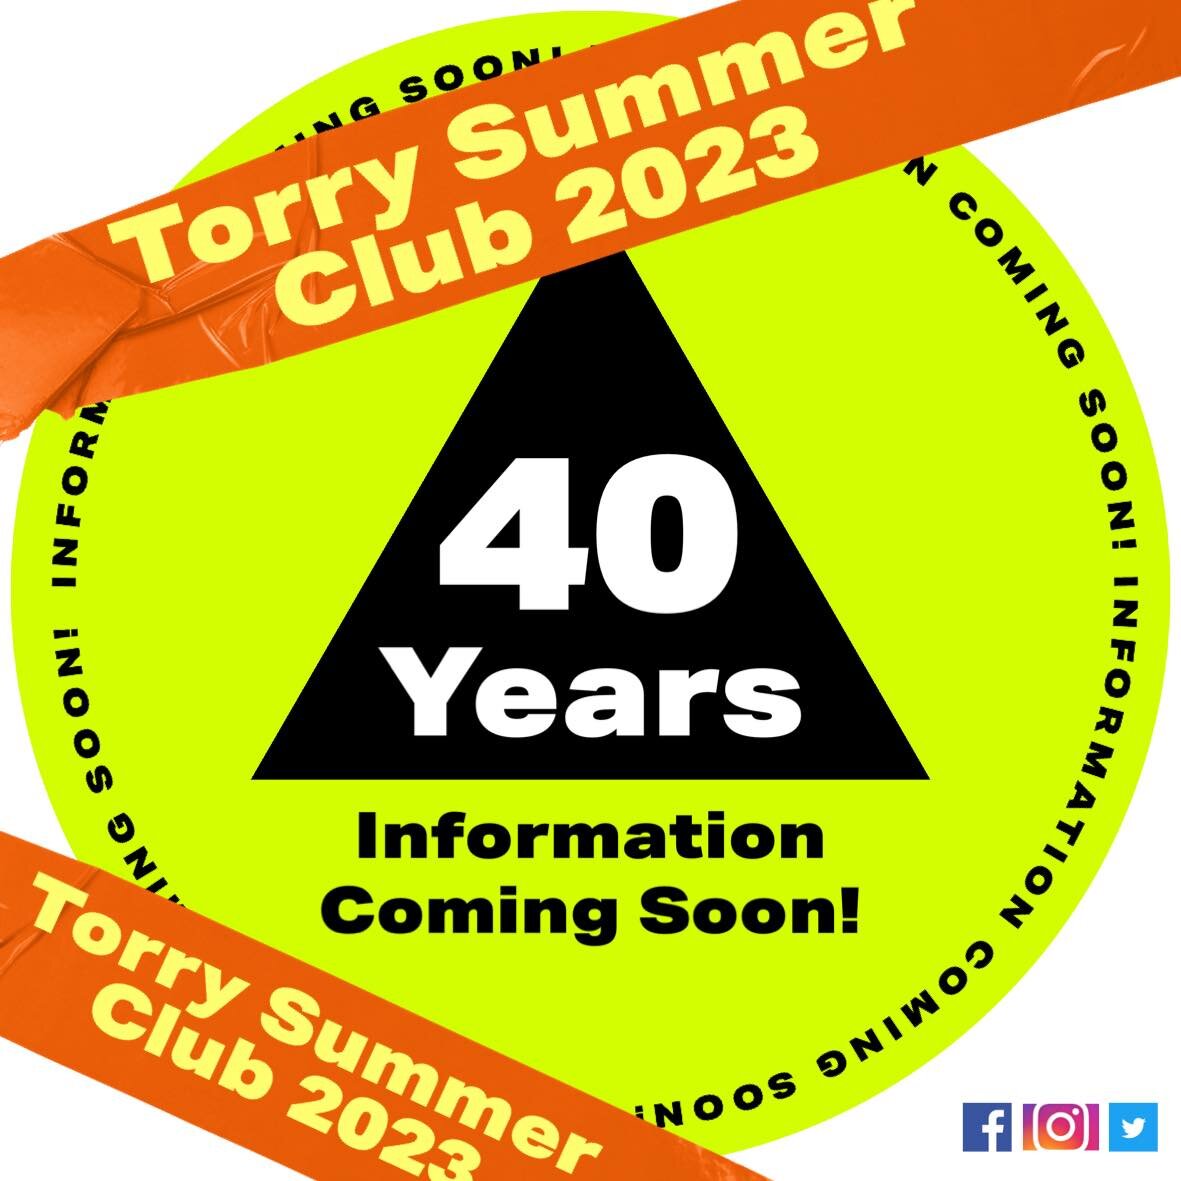 &hellip;.Coming soon&hellip;.

😎 And Yes, it&rsquo;s our 40th Year. Exciting times ahead ☀️